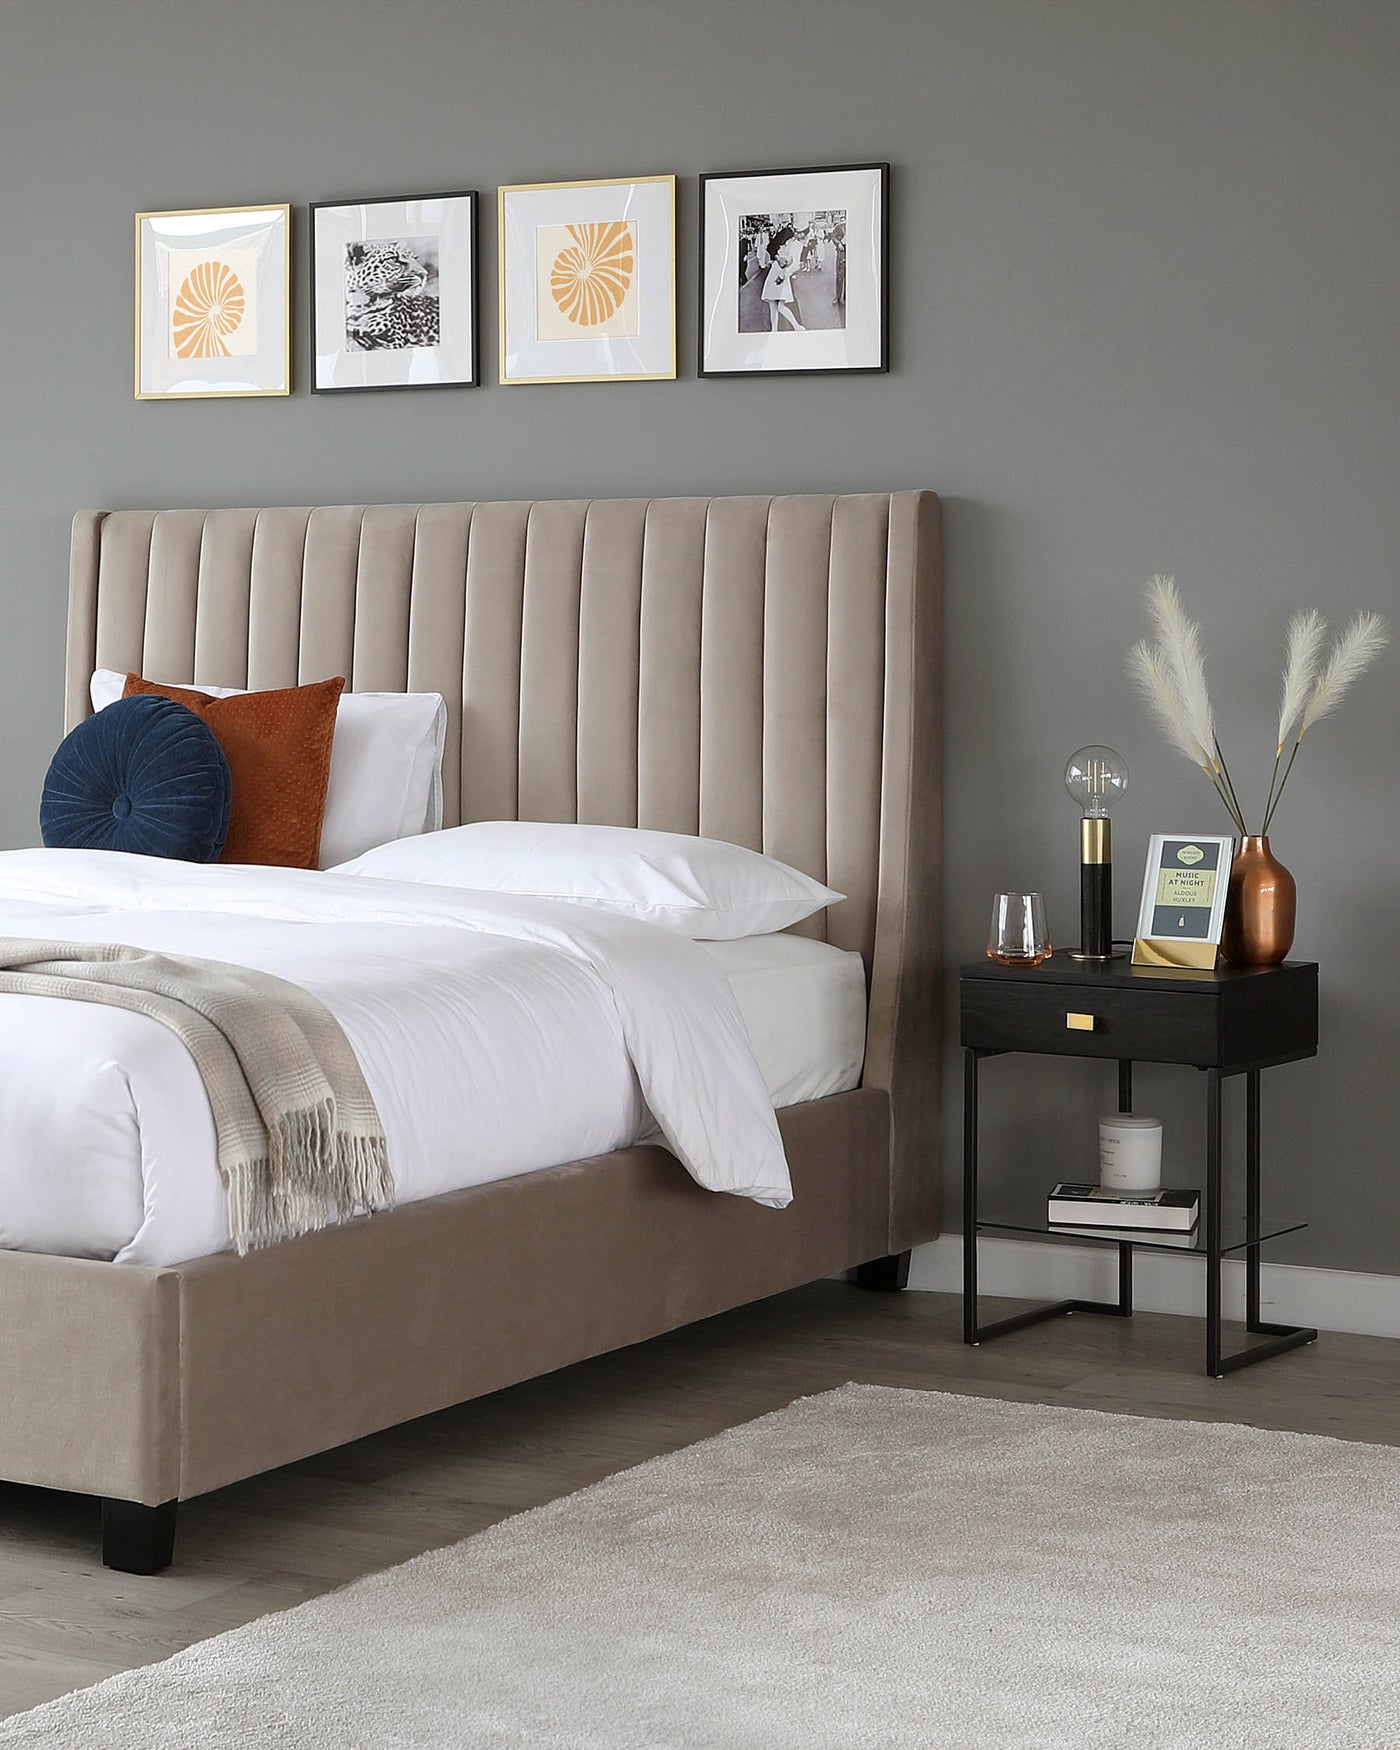 A plush, taupe upholstered bed with a high, vertically channel-tufted headboard and a thin neutral-toned blanket at the foot. Beside the bed is a modern black nightstand with clean lines, featuring an open shelf and a drawer. A small table lamp with a brass finish, decorative vases, and a book are placed on top of the nightstand. A soft grey area rug lies on the floor, partially under the bed.